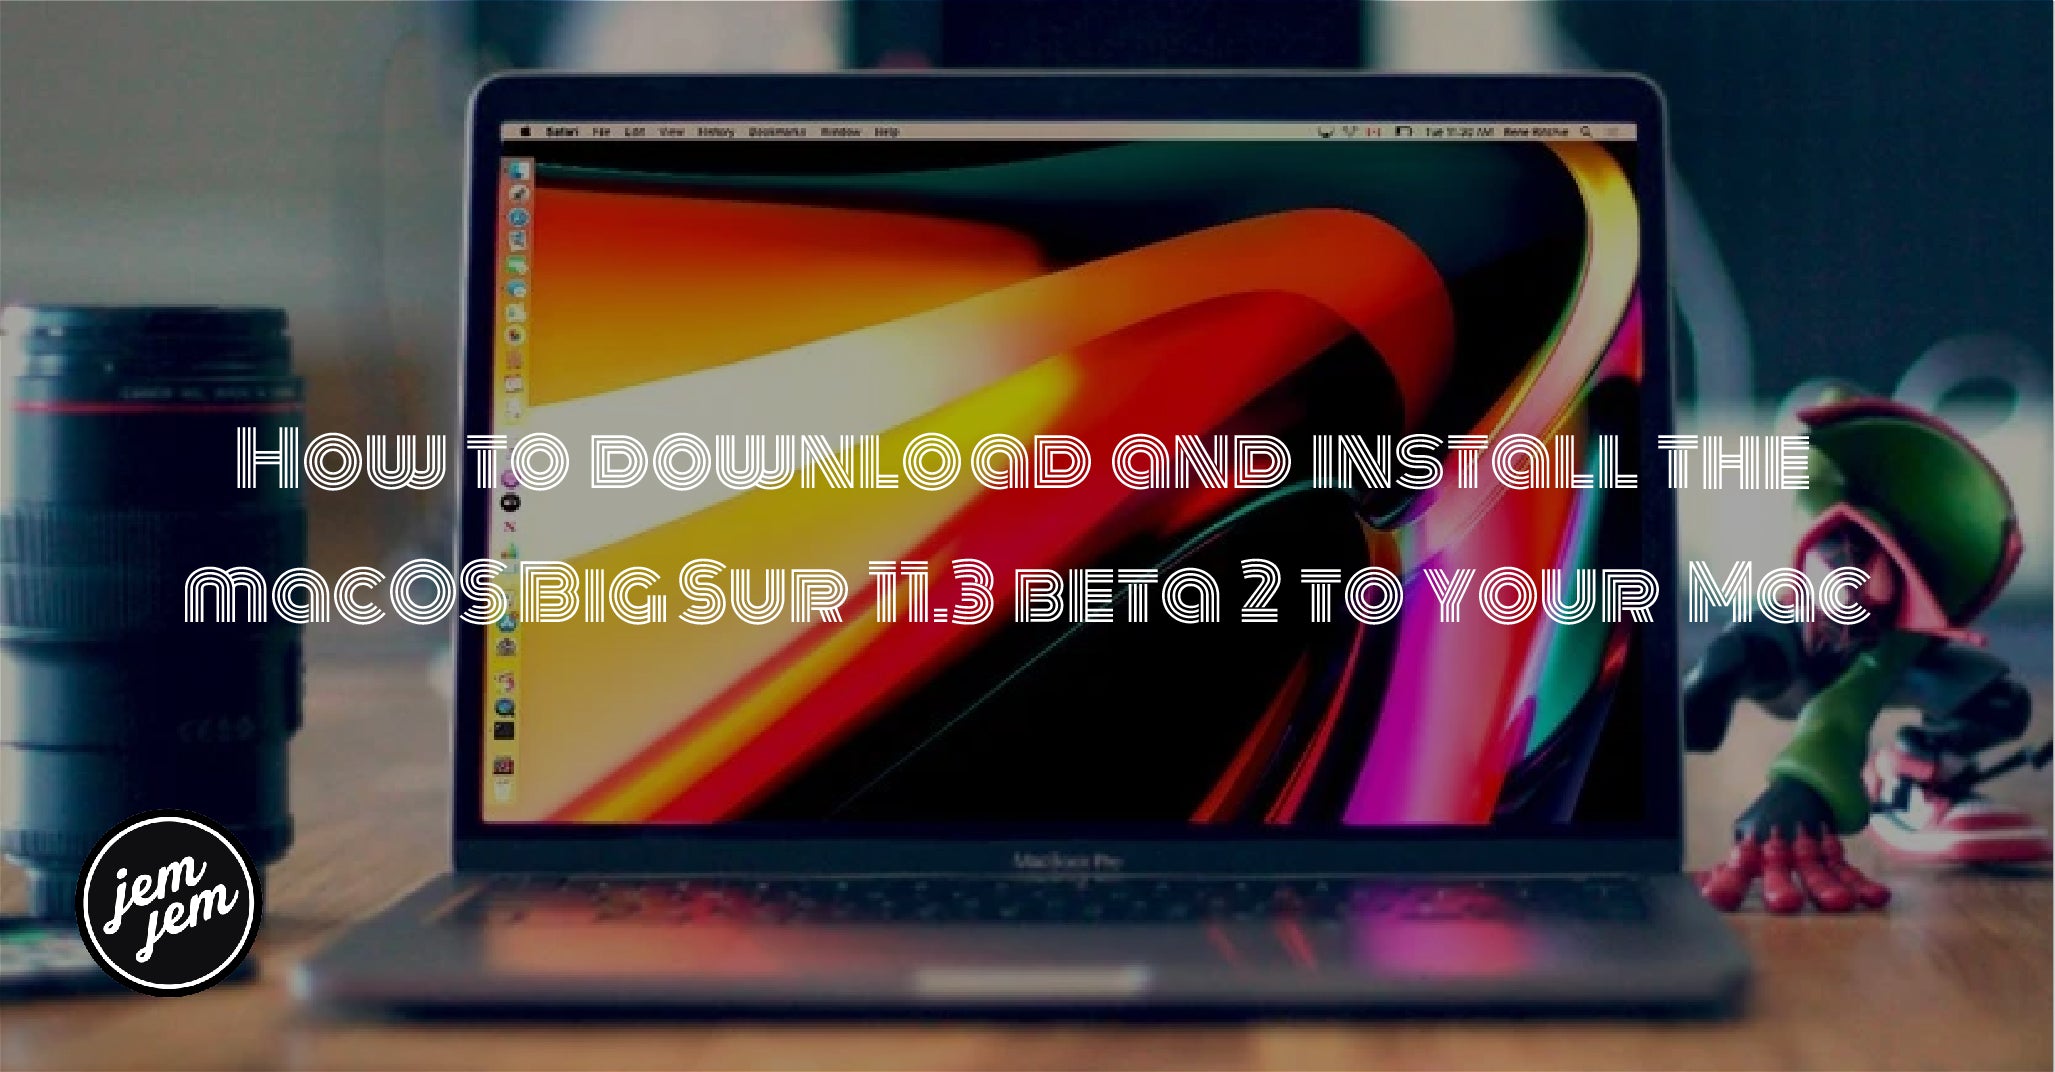 How to download and install the macOS Big Sur 11.3 beta 2 to your Mac